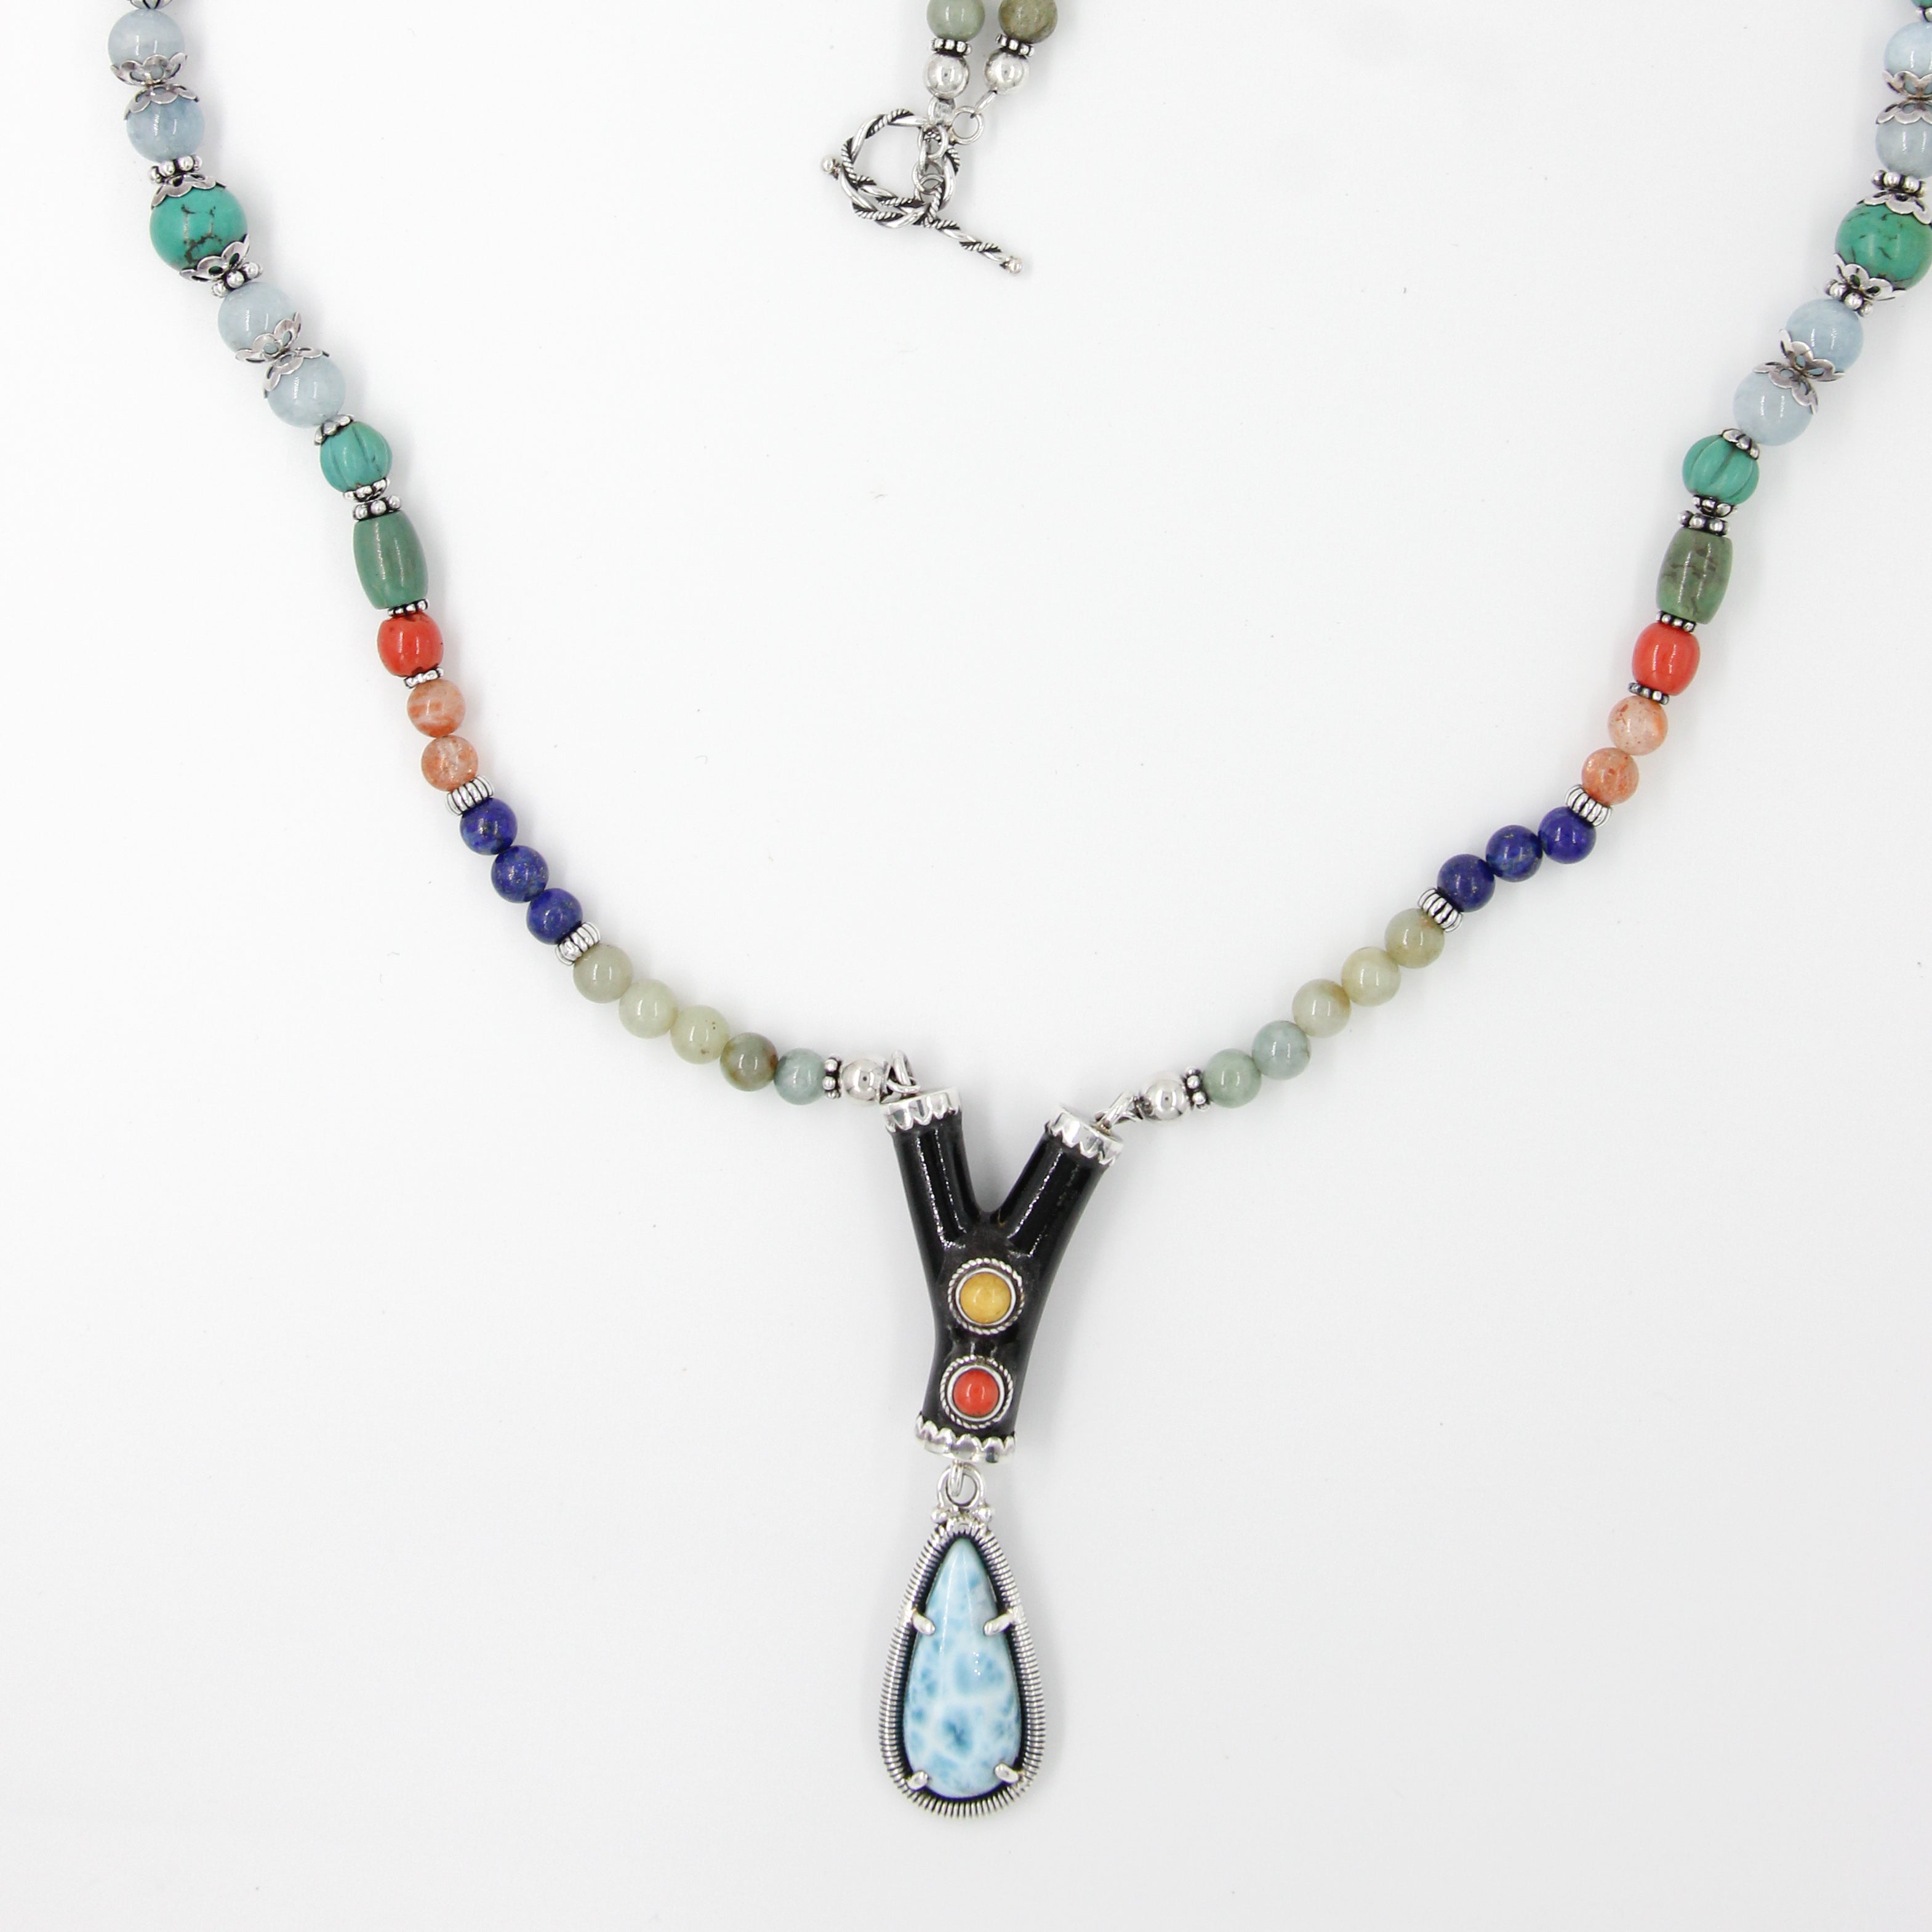 Larimar Stone Necklace with Black Coral, Jade, Lapis Lazuli, Red Coral, Sun Stone, Turquoise, Aquamarine and Silver Beads